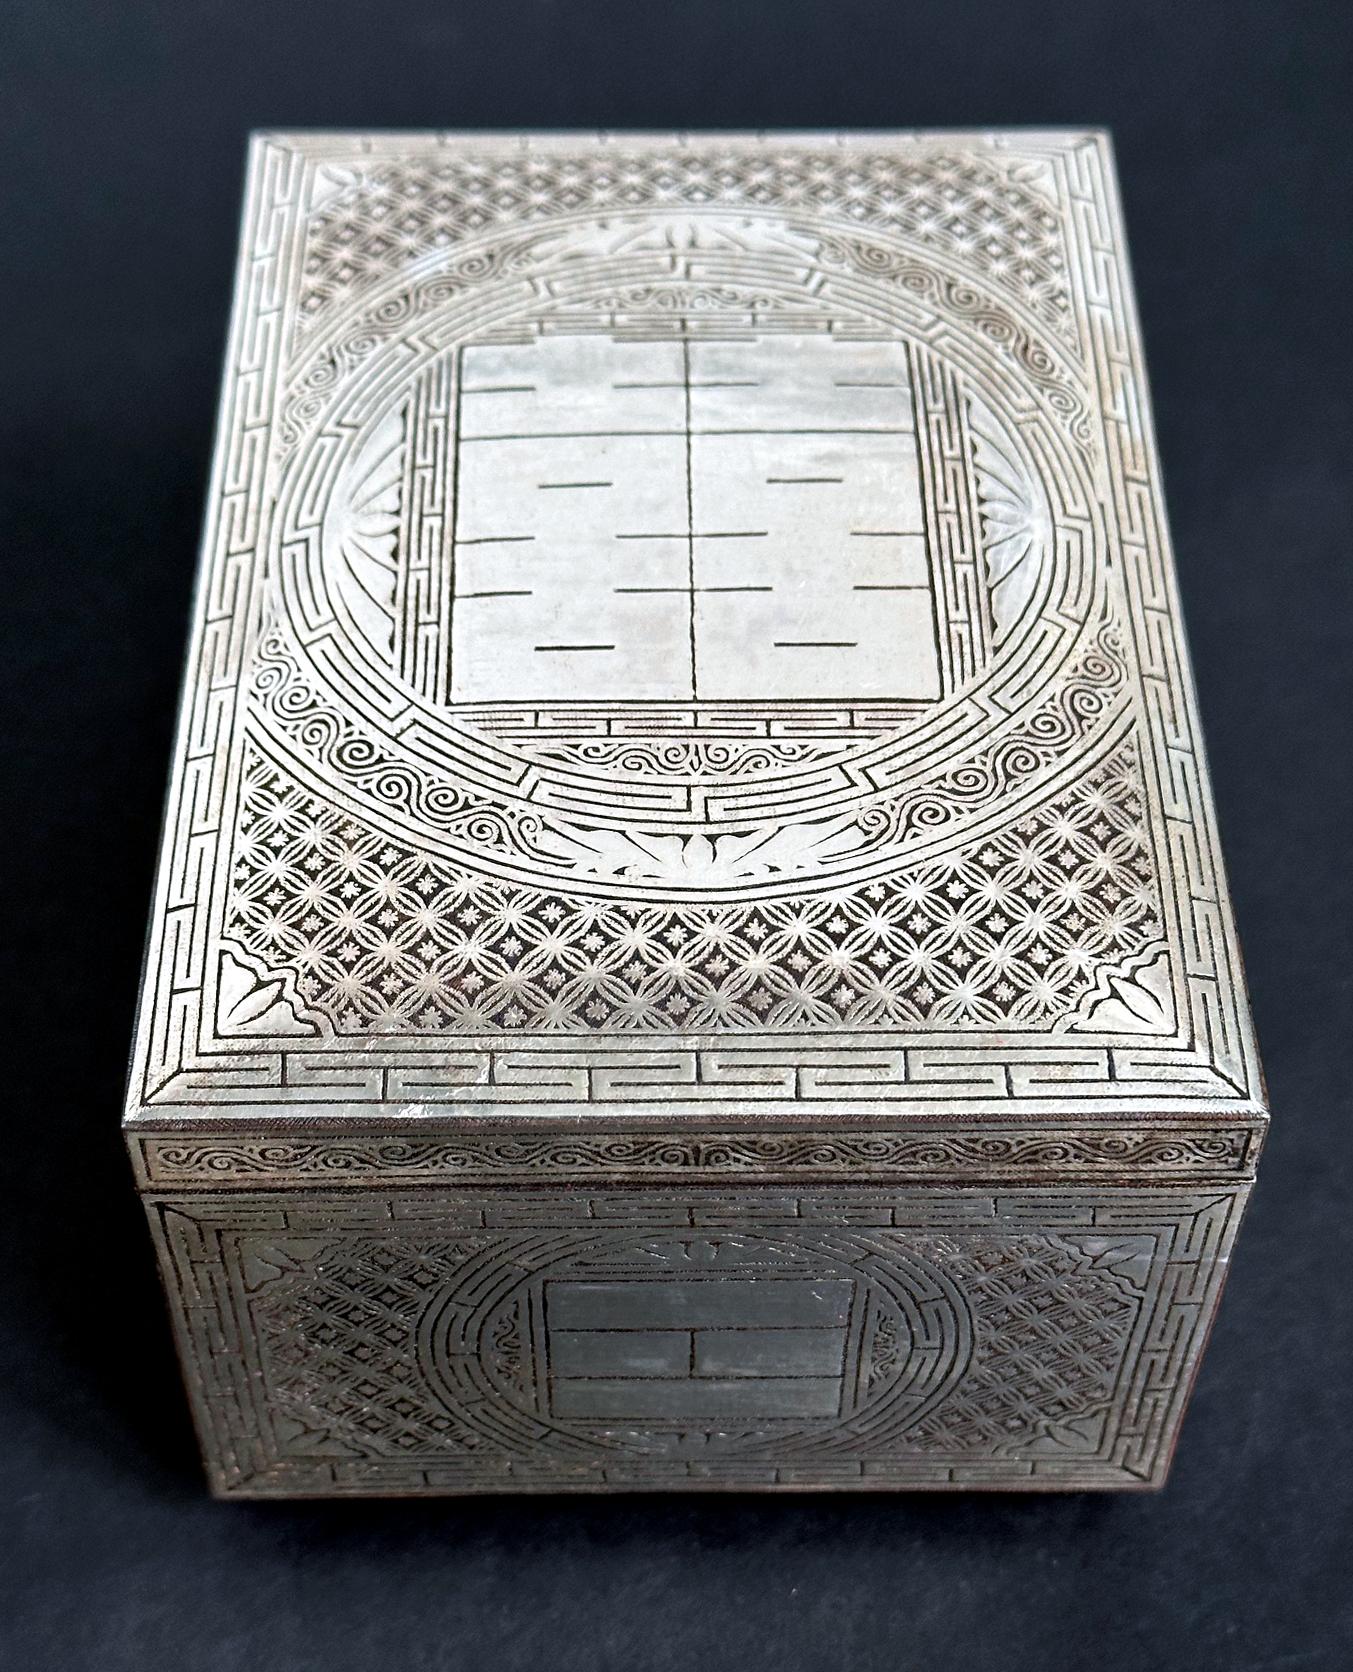 A fine Korean iron box with intricate silver inlay dated to the late Joseon Dynasty circa 19th century. The body of the box is made from iron of a heavy weight although the wear on the base has exposed a bronze metal color underneath, indicating the